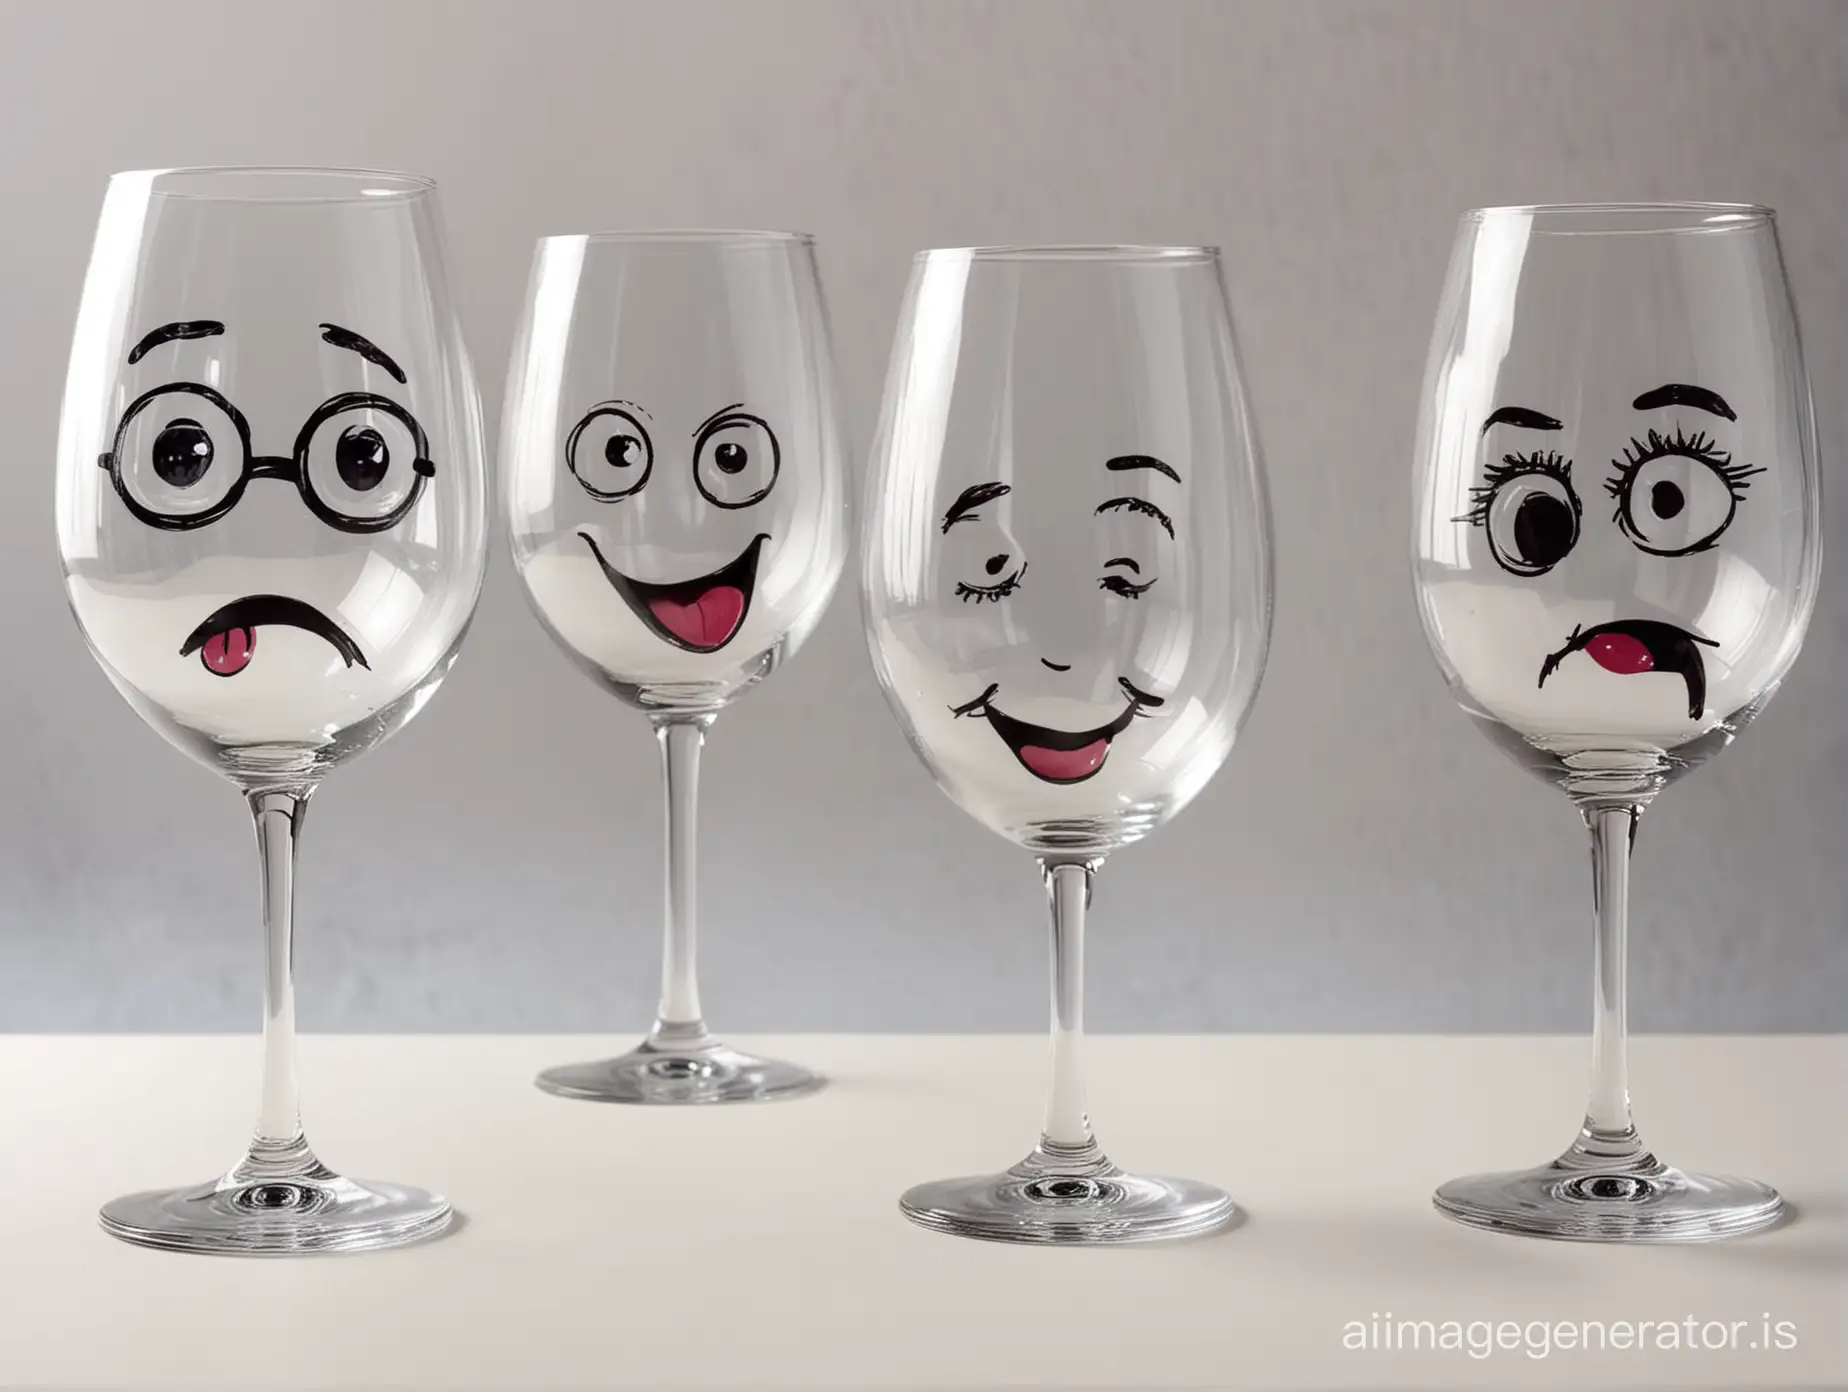 Colorful-Wine-Glasses-with-Playful-Facial-Expressions